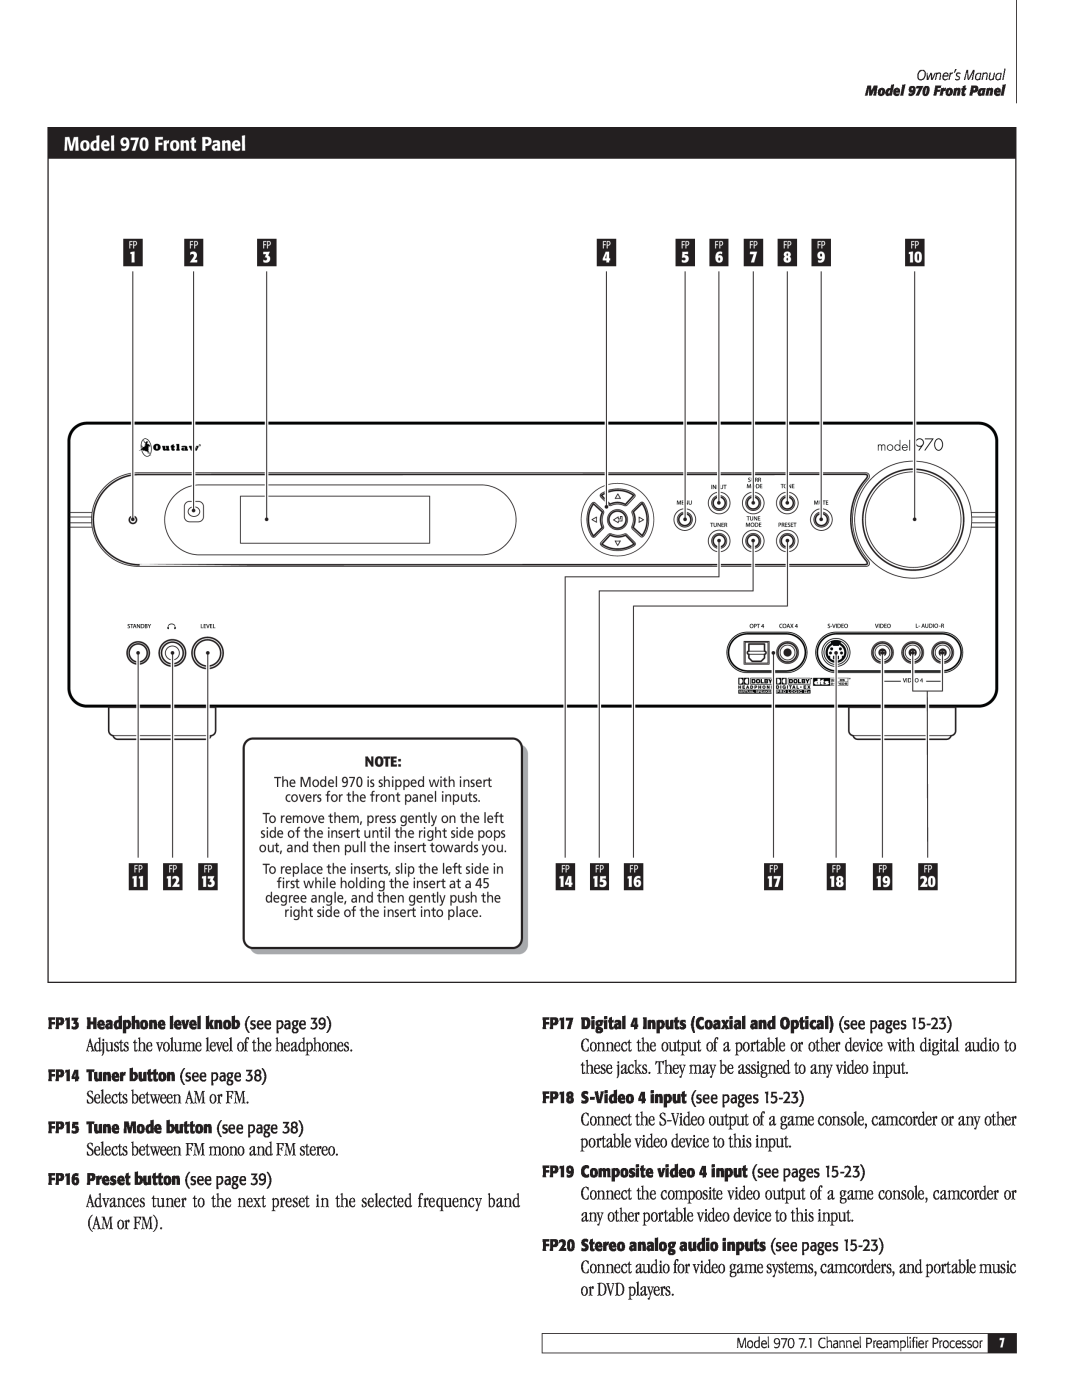 Outlaw Audio owner manual Model 970 Front Panel, Adjusts the volume level of the headphones, Selects between AM or FM 